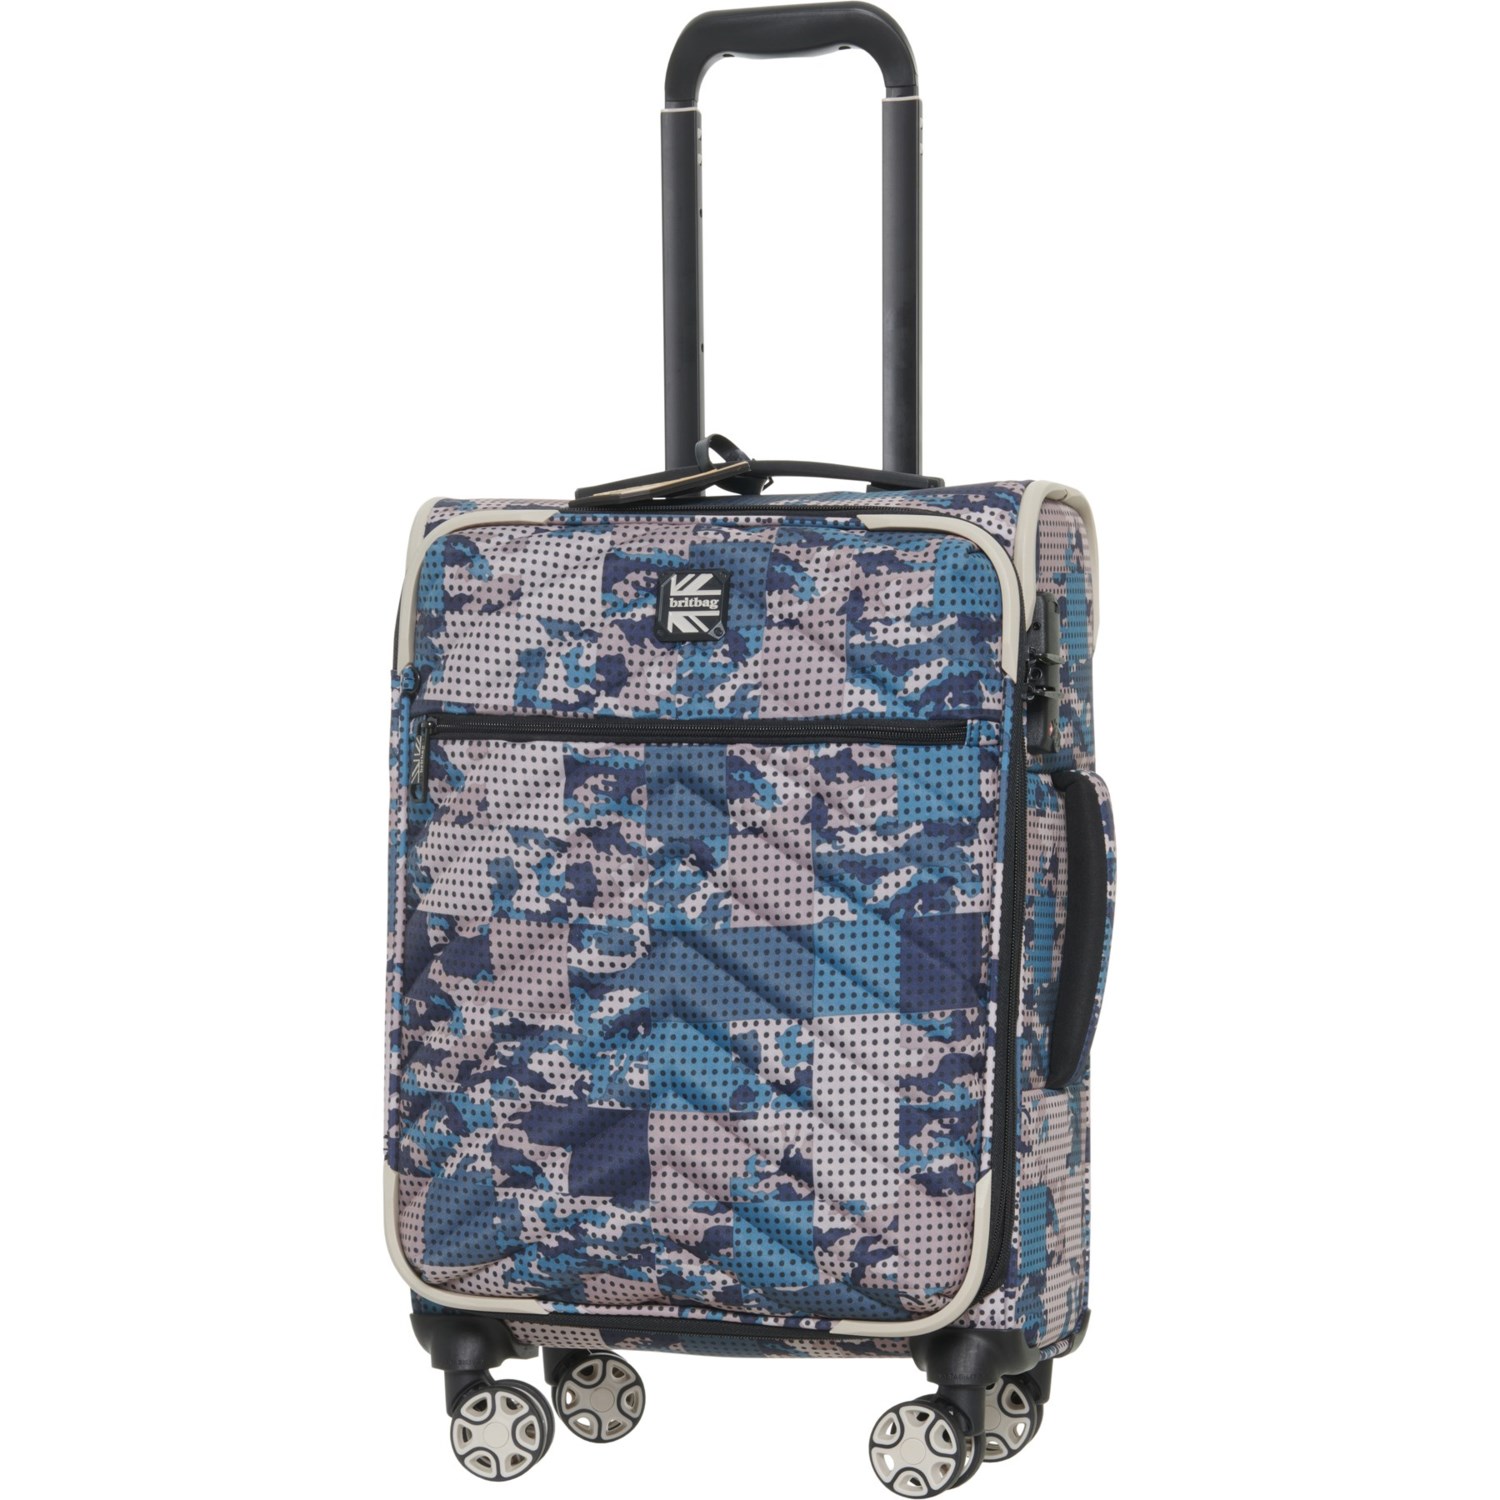 BritBag 19” Eluder Carry-On Spinner Suitcase - Softside, Expandable, Cool Blue Camo